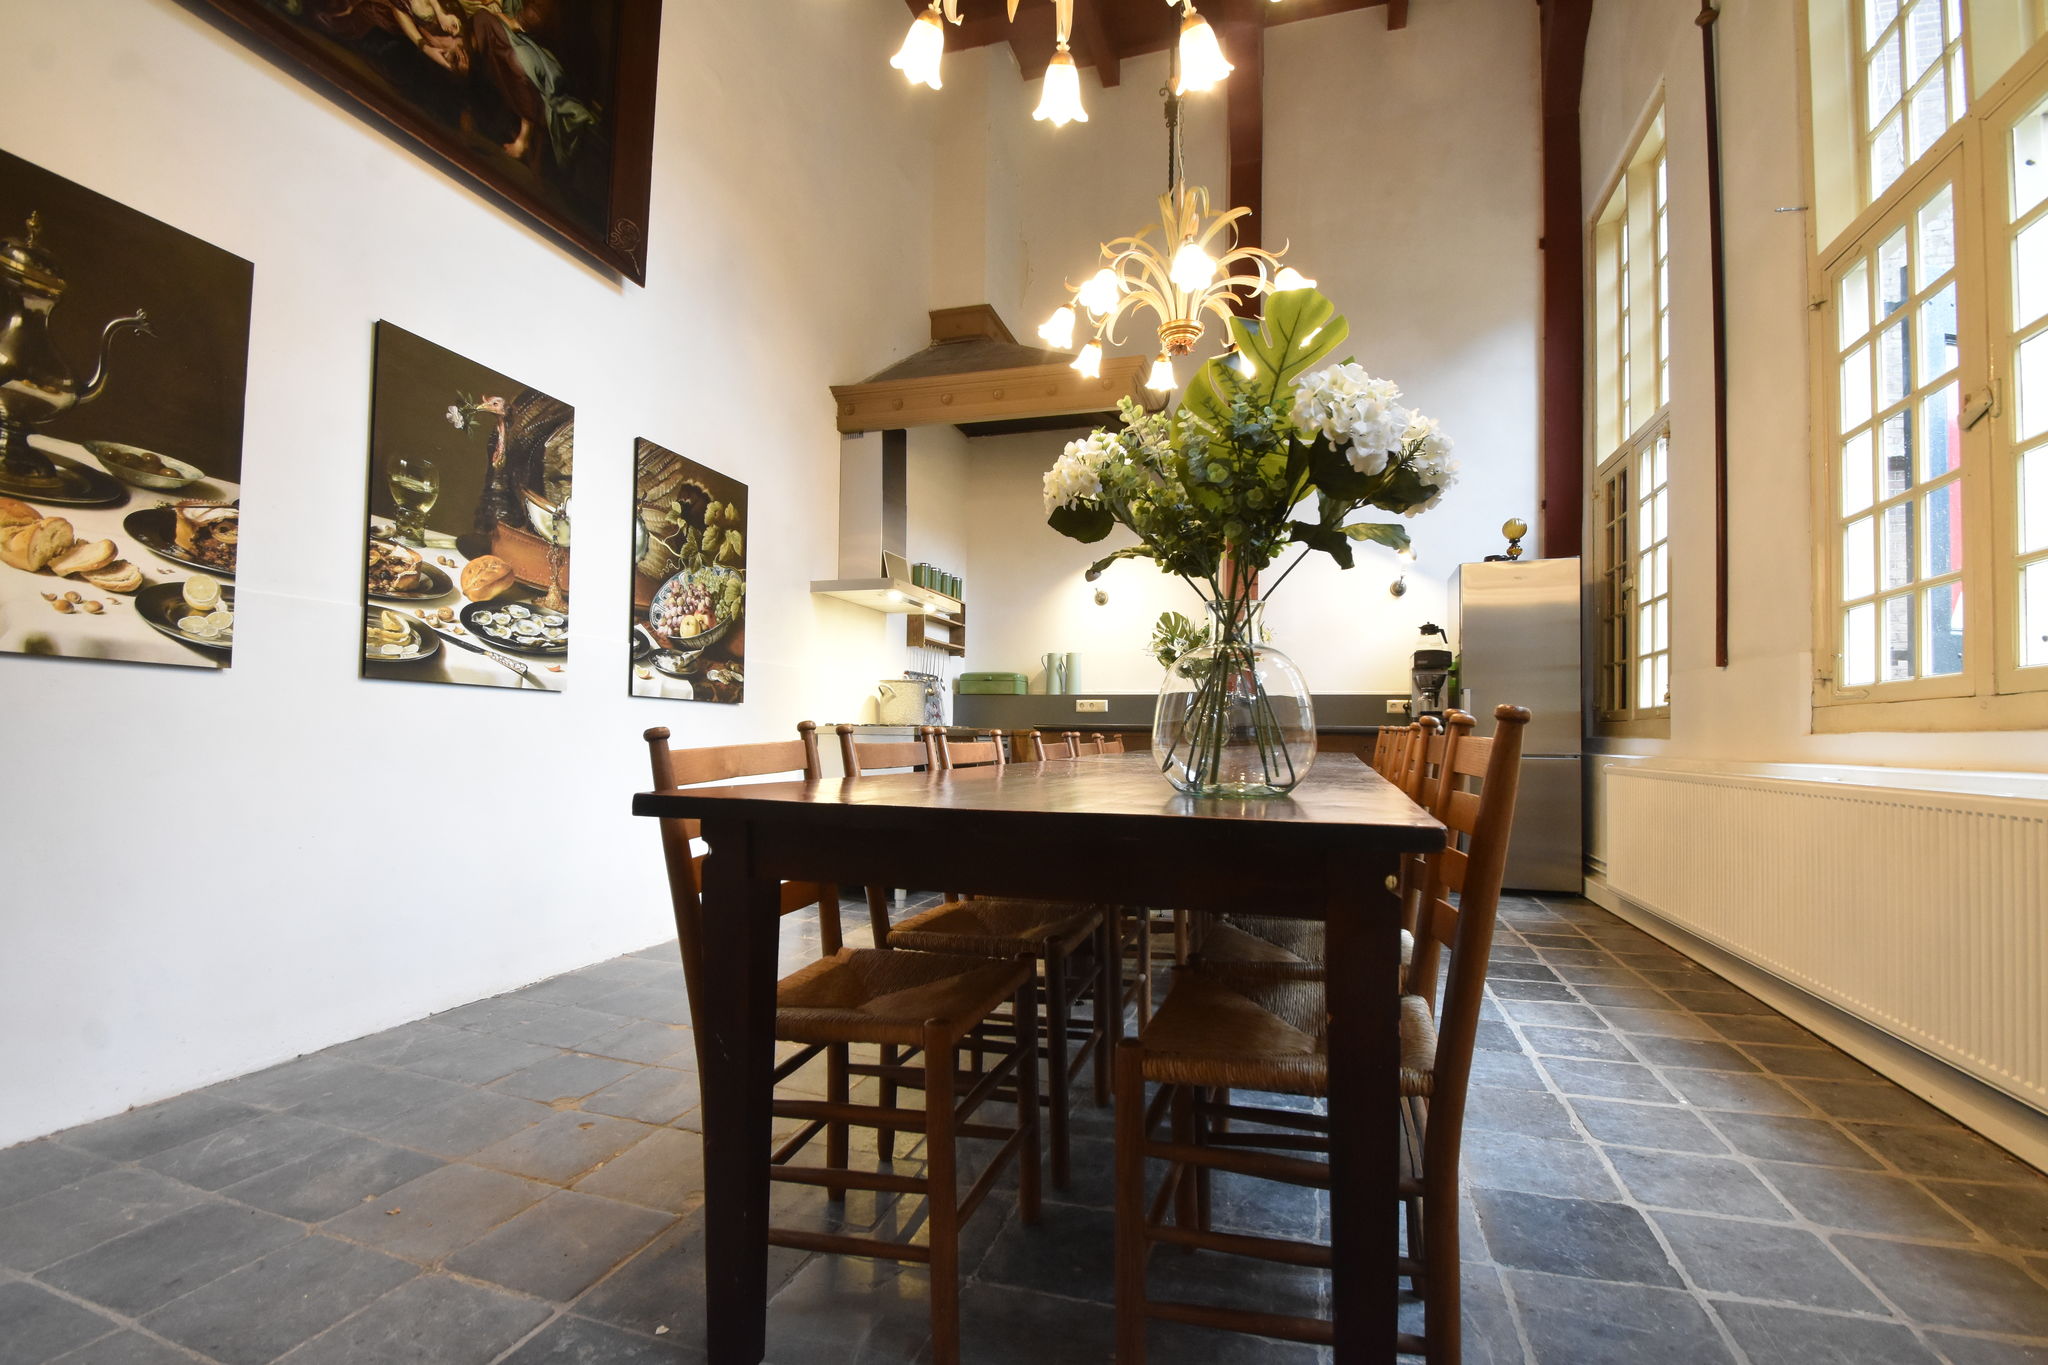 Unique group accommodation for up to 32 people in the centre of Enkhuizen